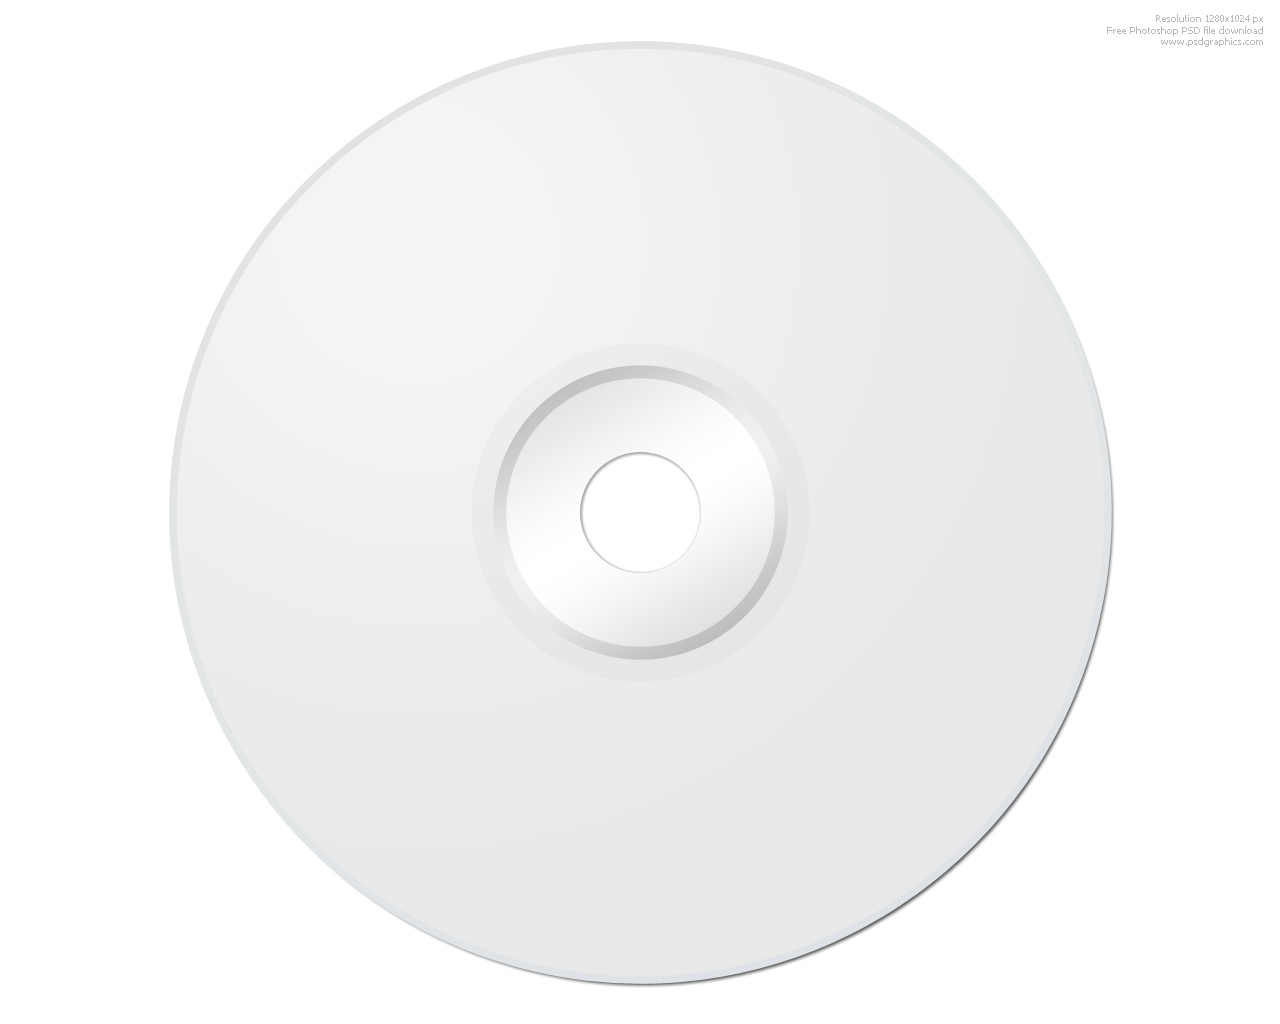 10-cd-dvd-label-psd-templates-images-free-dvd-label-templates-blank